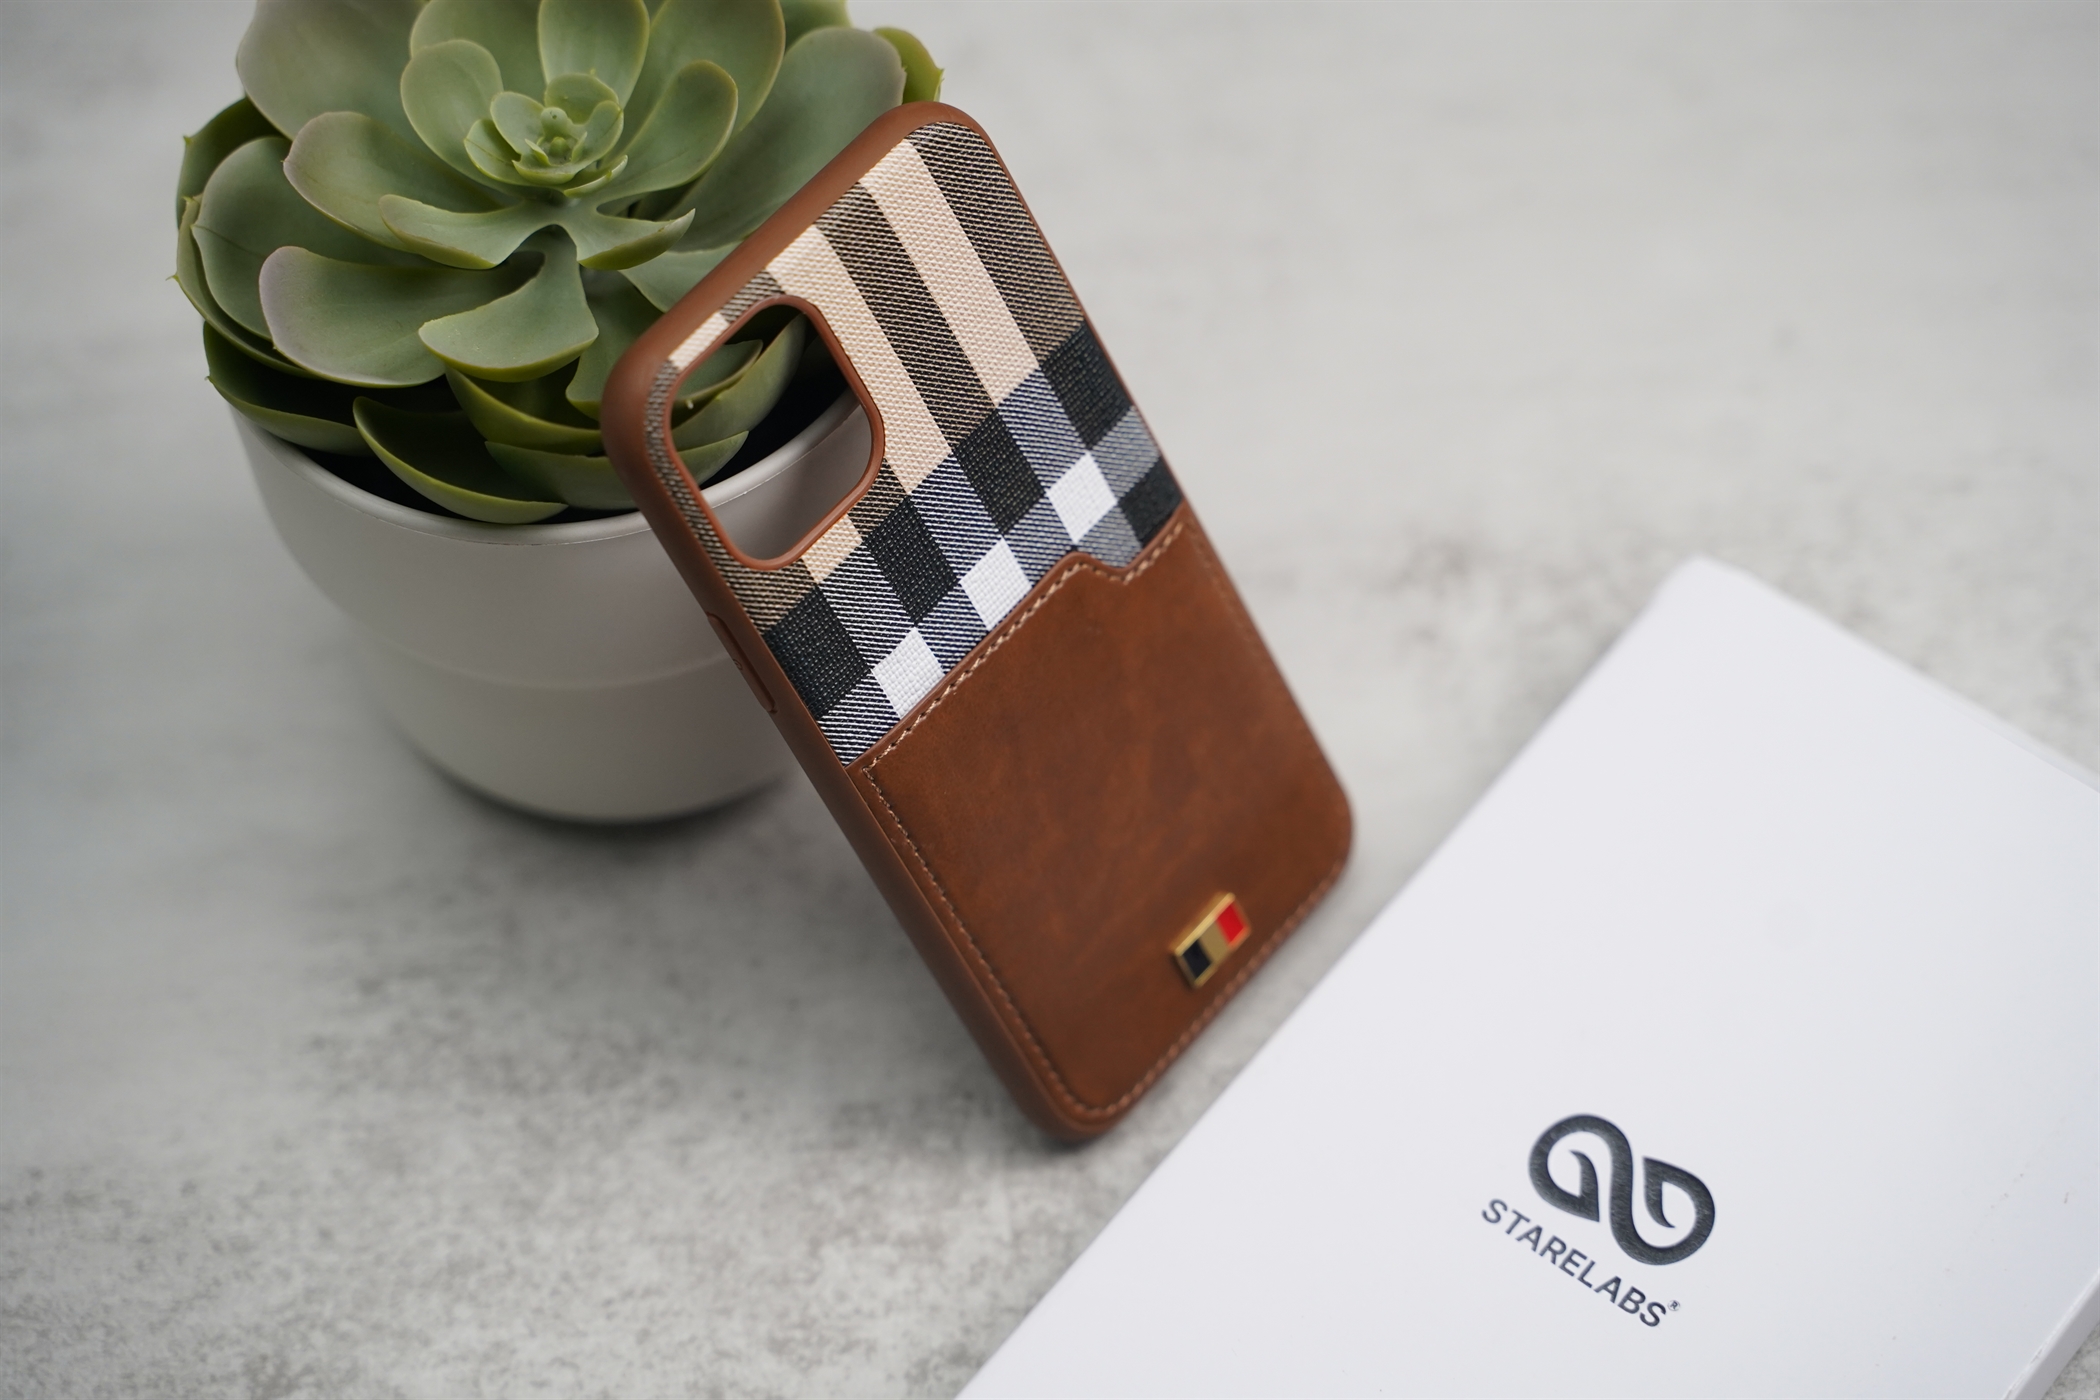 Chequered Leather Case with Card Slot - Starelabs® India